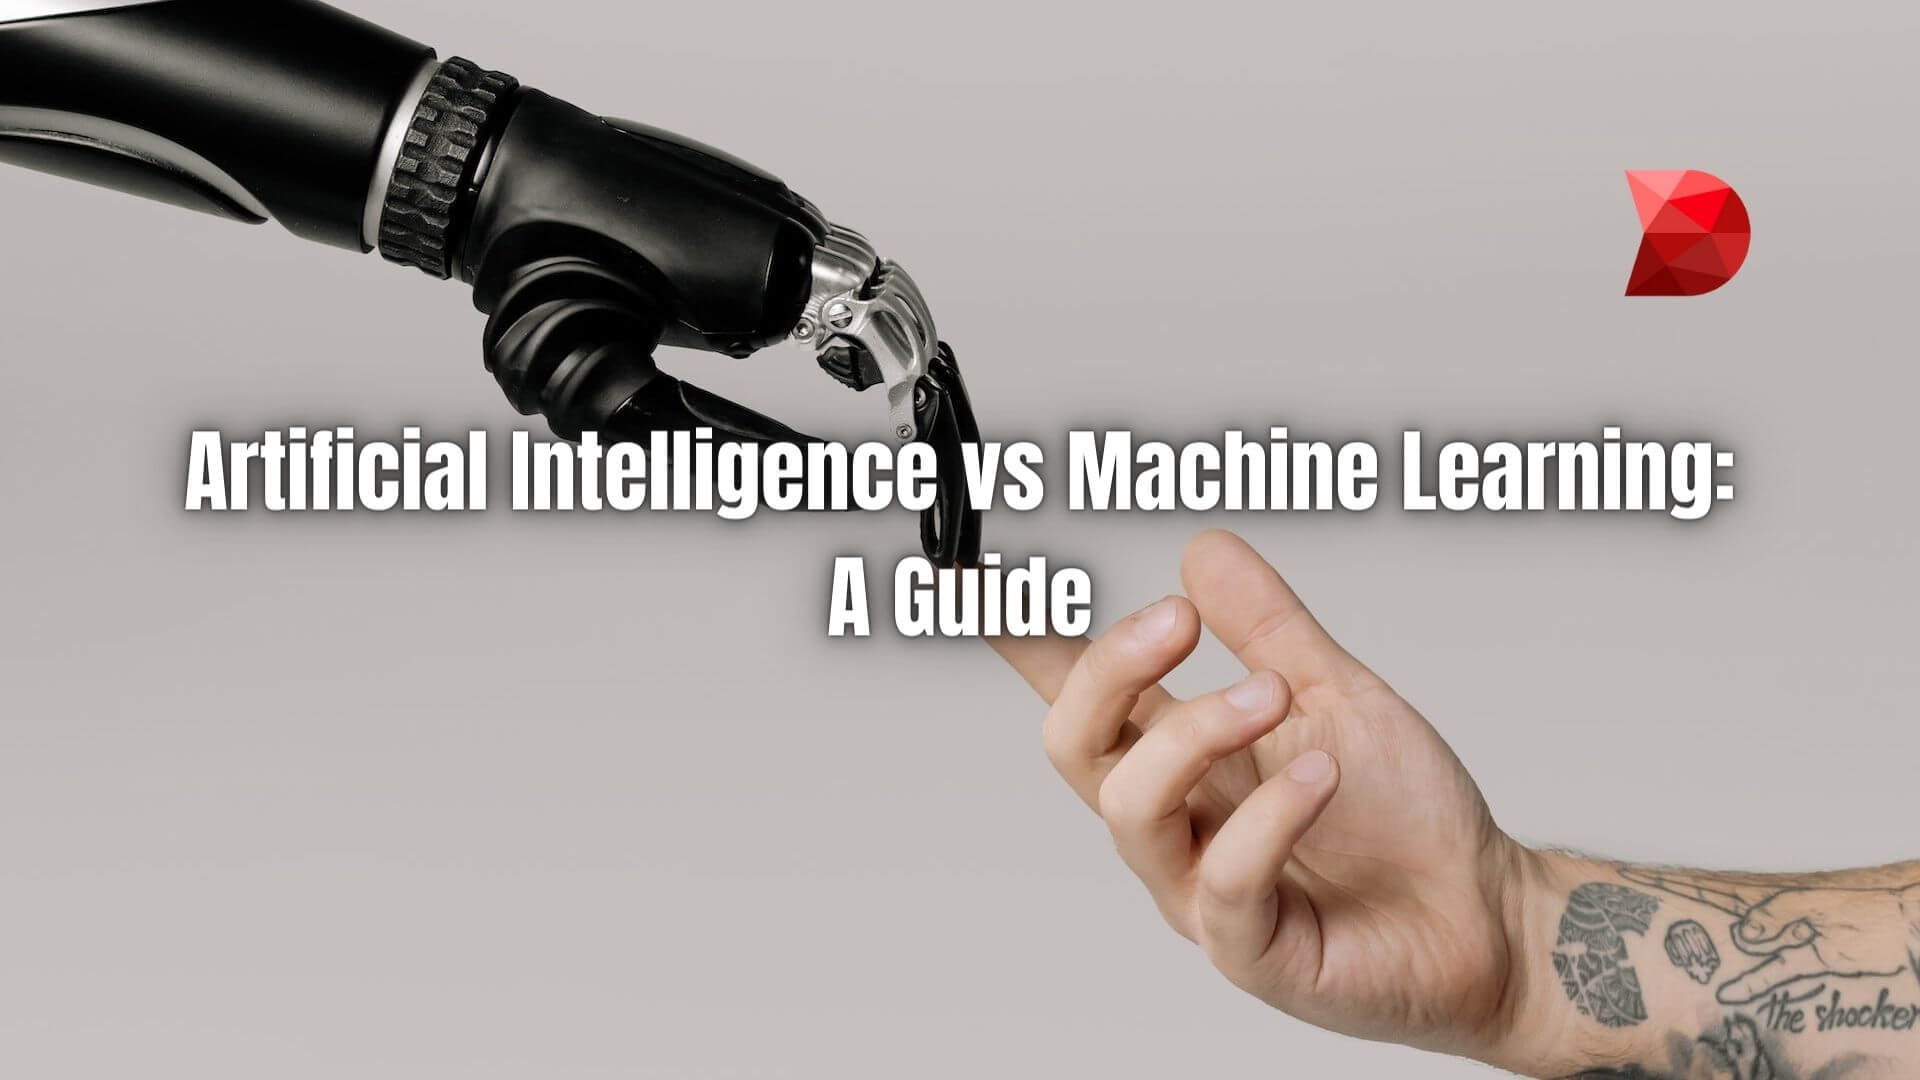 Artificial intelligence vs. machine learning, businesses use these technologies to their advantage in various tasks. Learn how they differ!